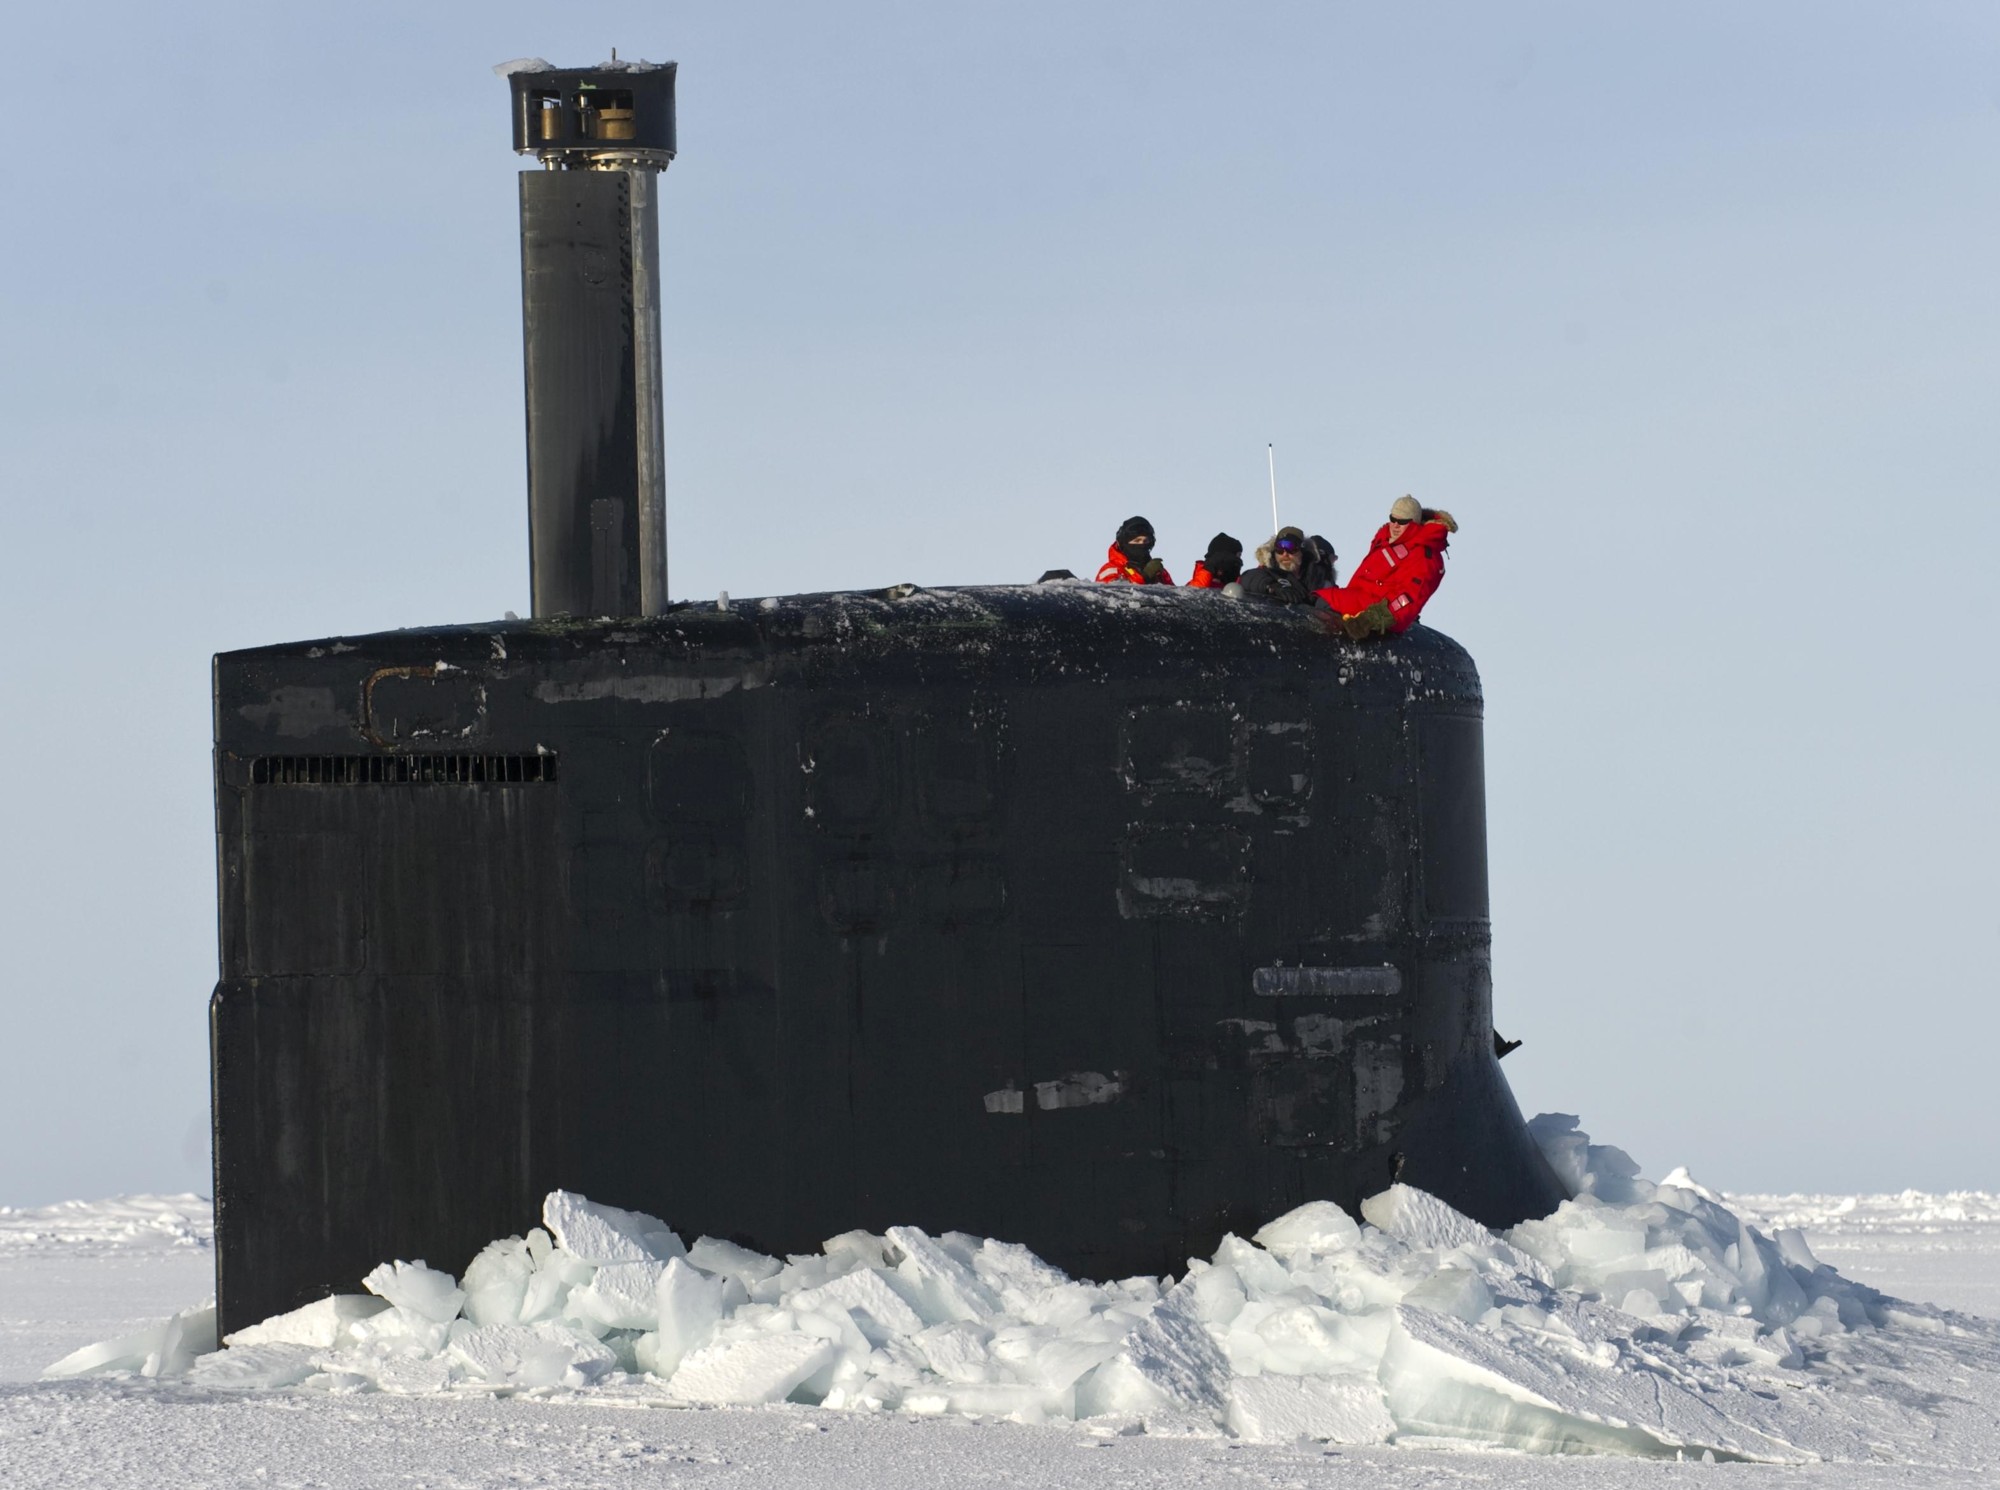 ssn-22 uss connecticut seawolf class attack submarine us navy exercise icex 11 arctic ocean prudhoe bay alaska 15